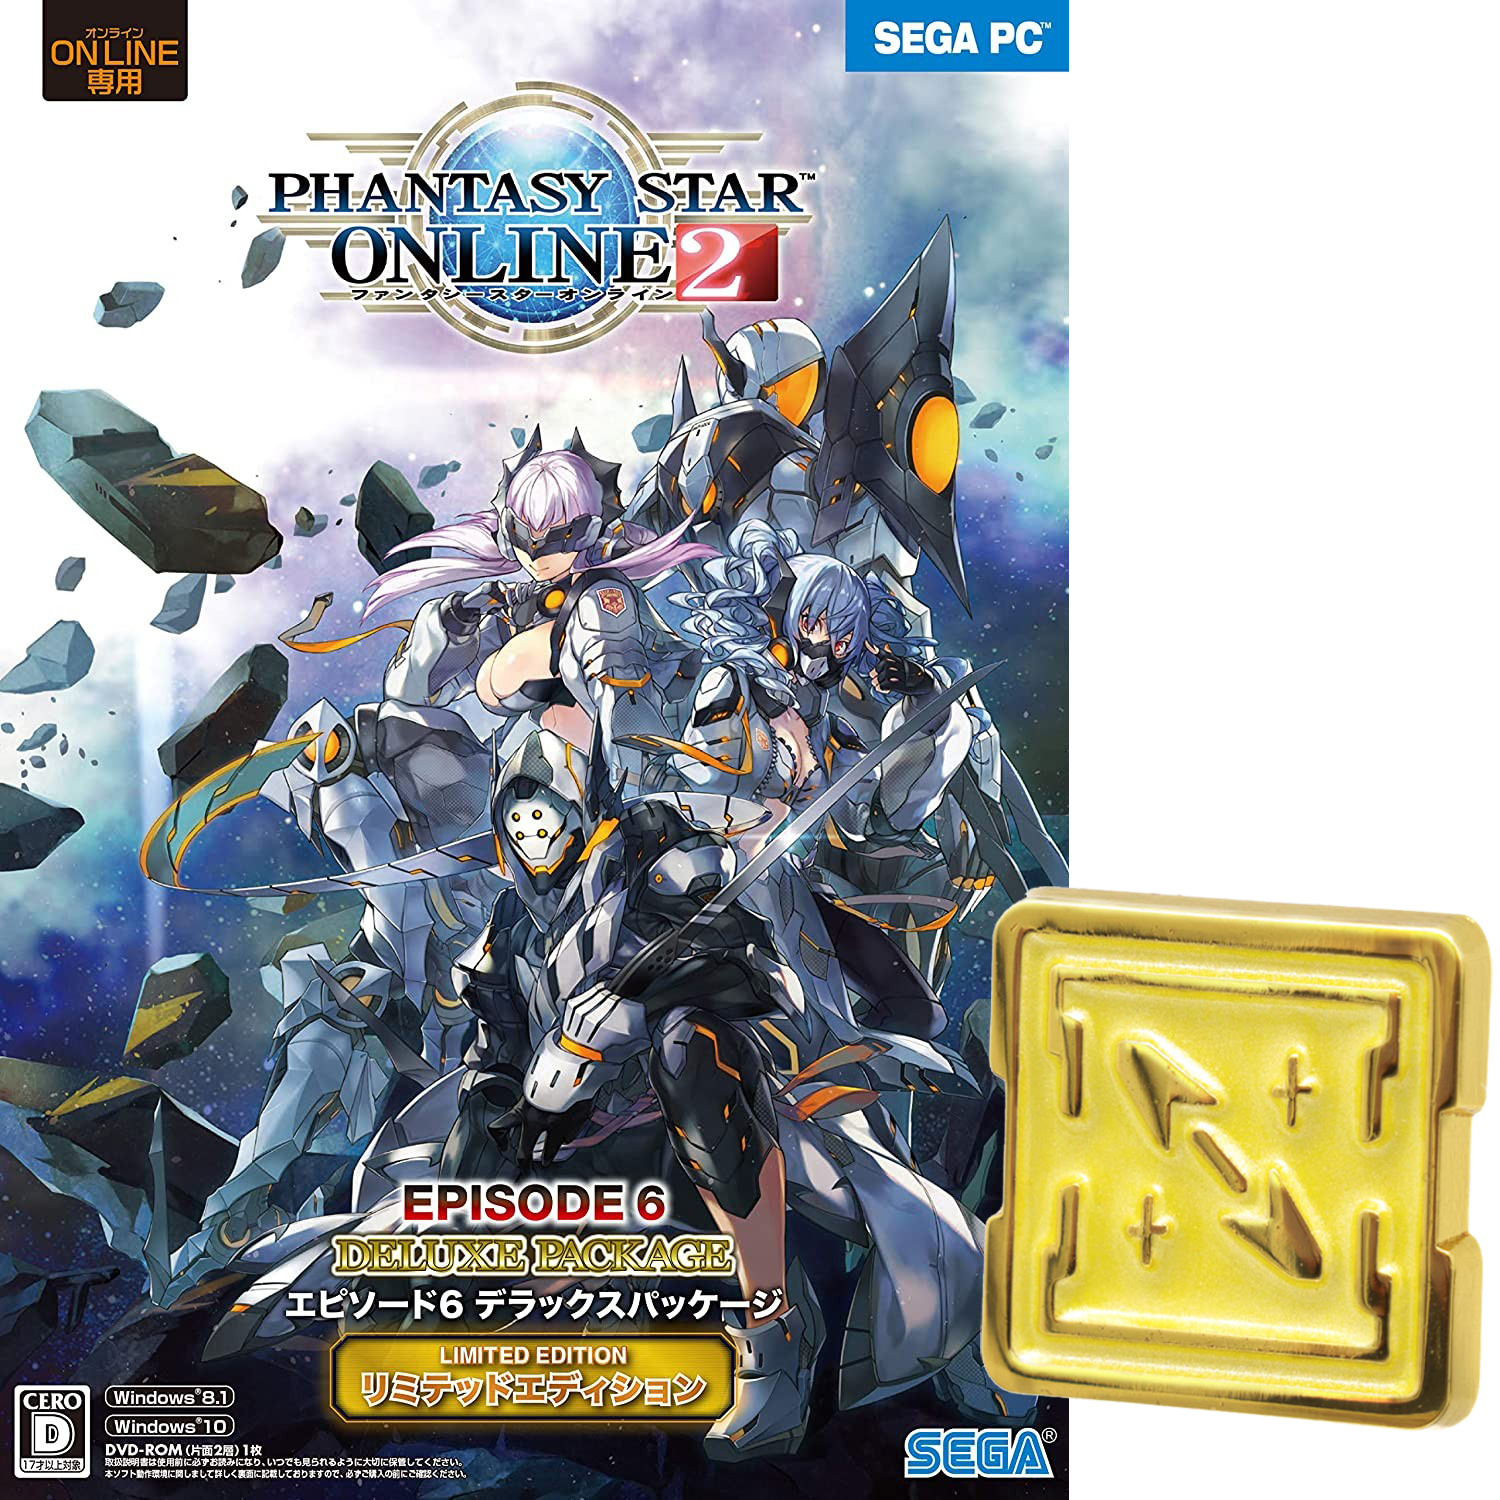 Phantasy Star Online 2 Episode 6 Deluxe Package Limited Edition Dvd Rom